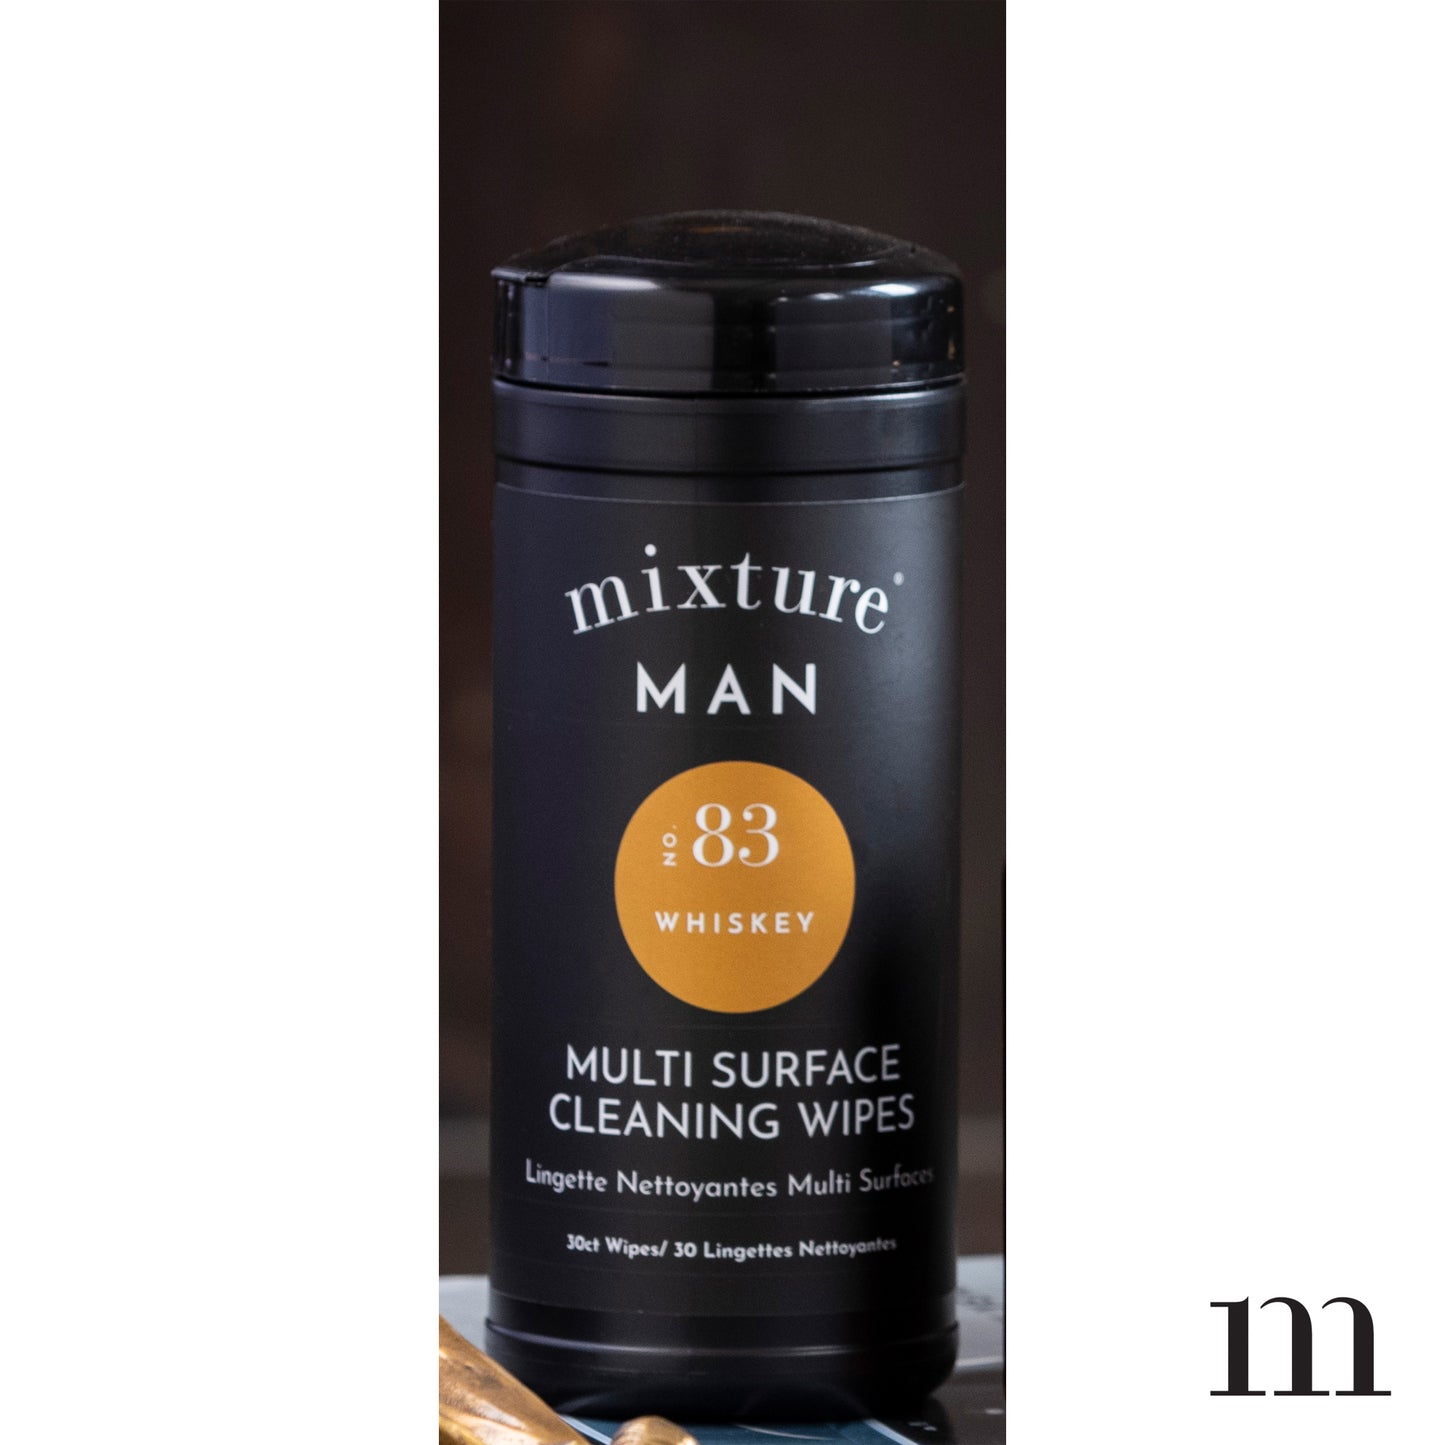 Mixture Man Multi Surface Cleaning Wipes